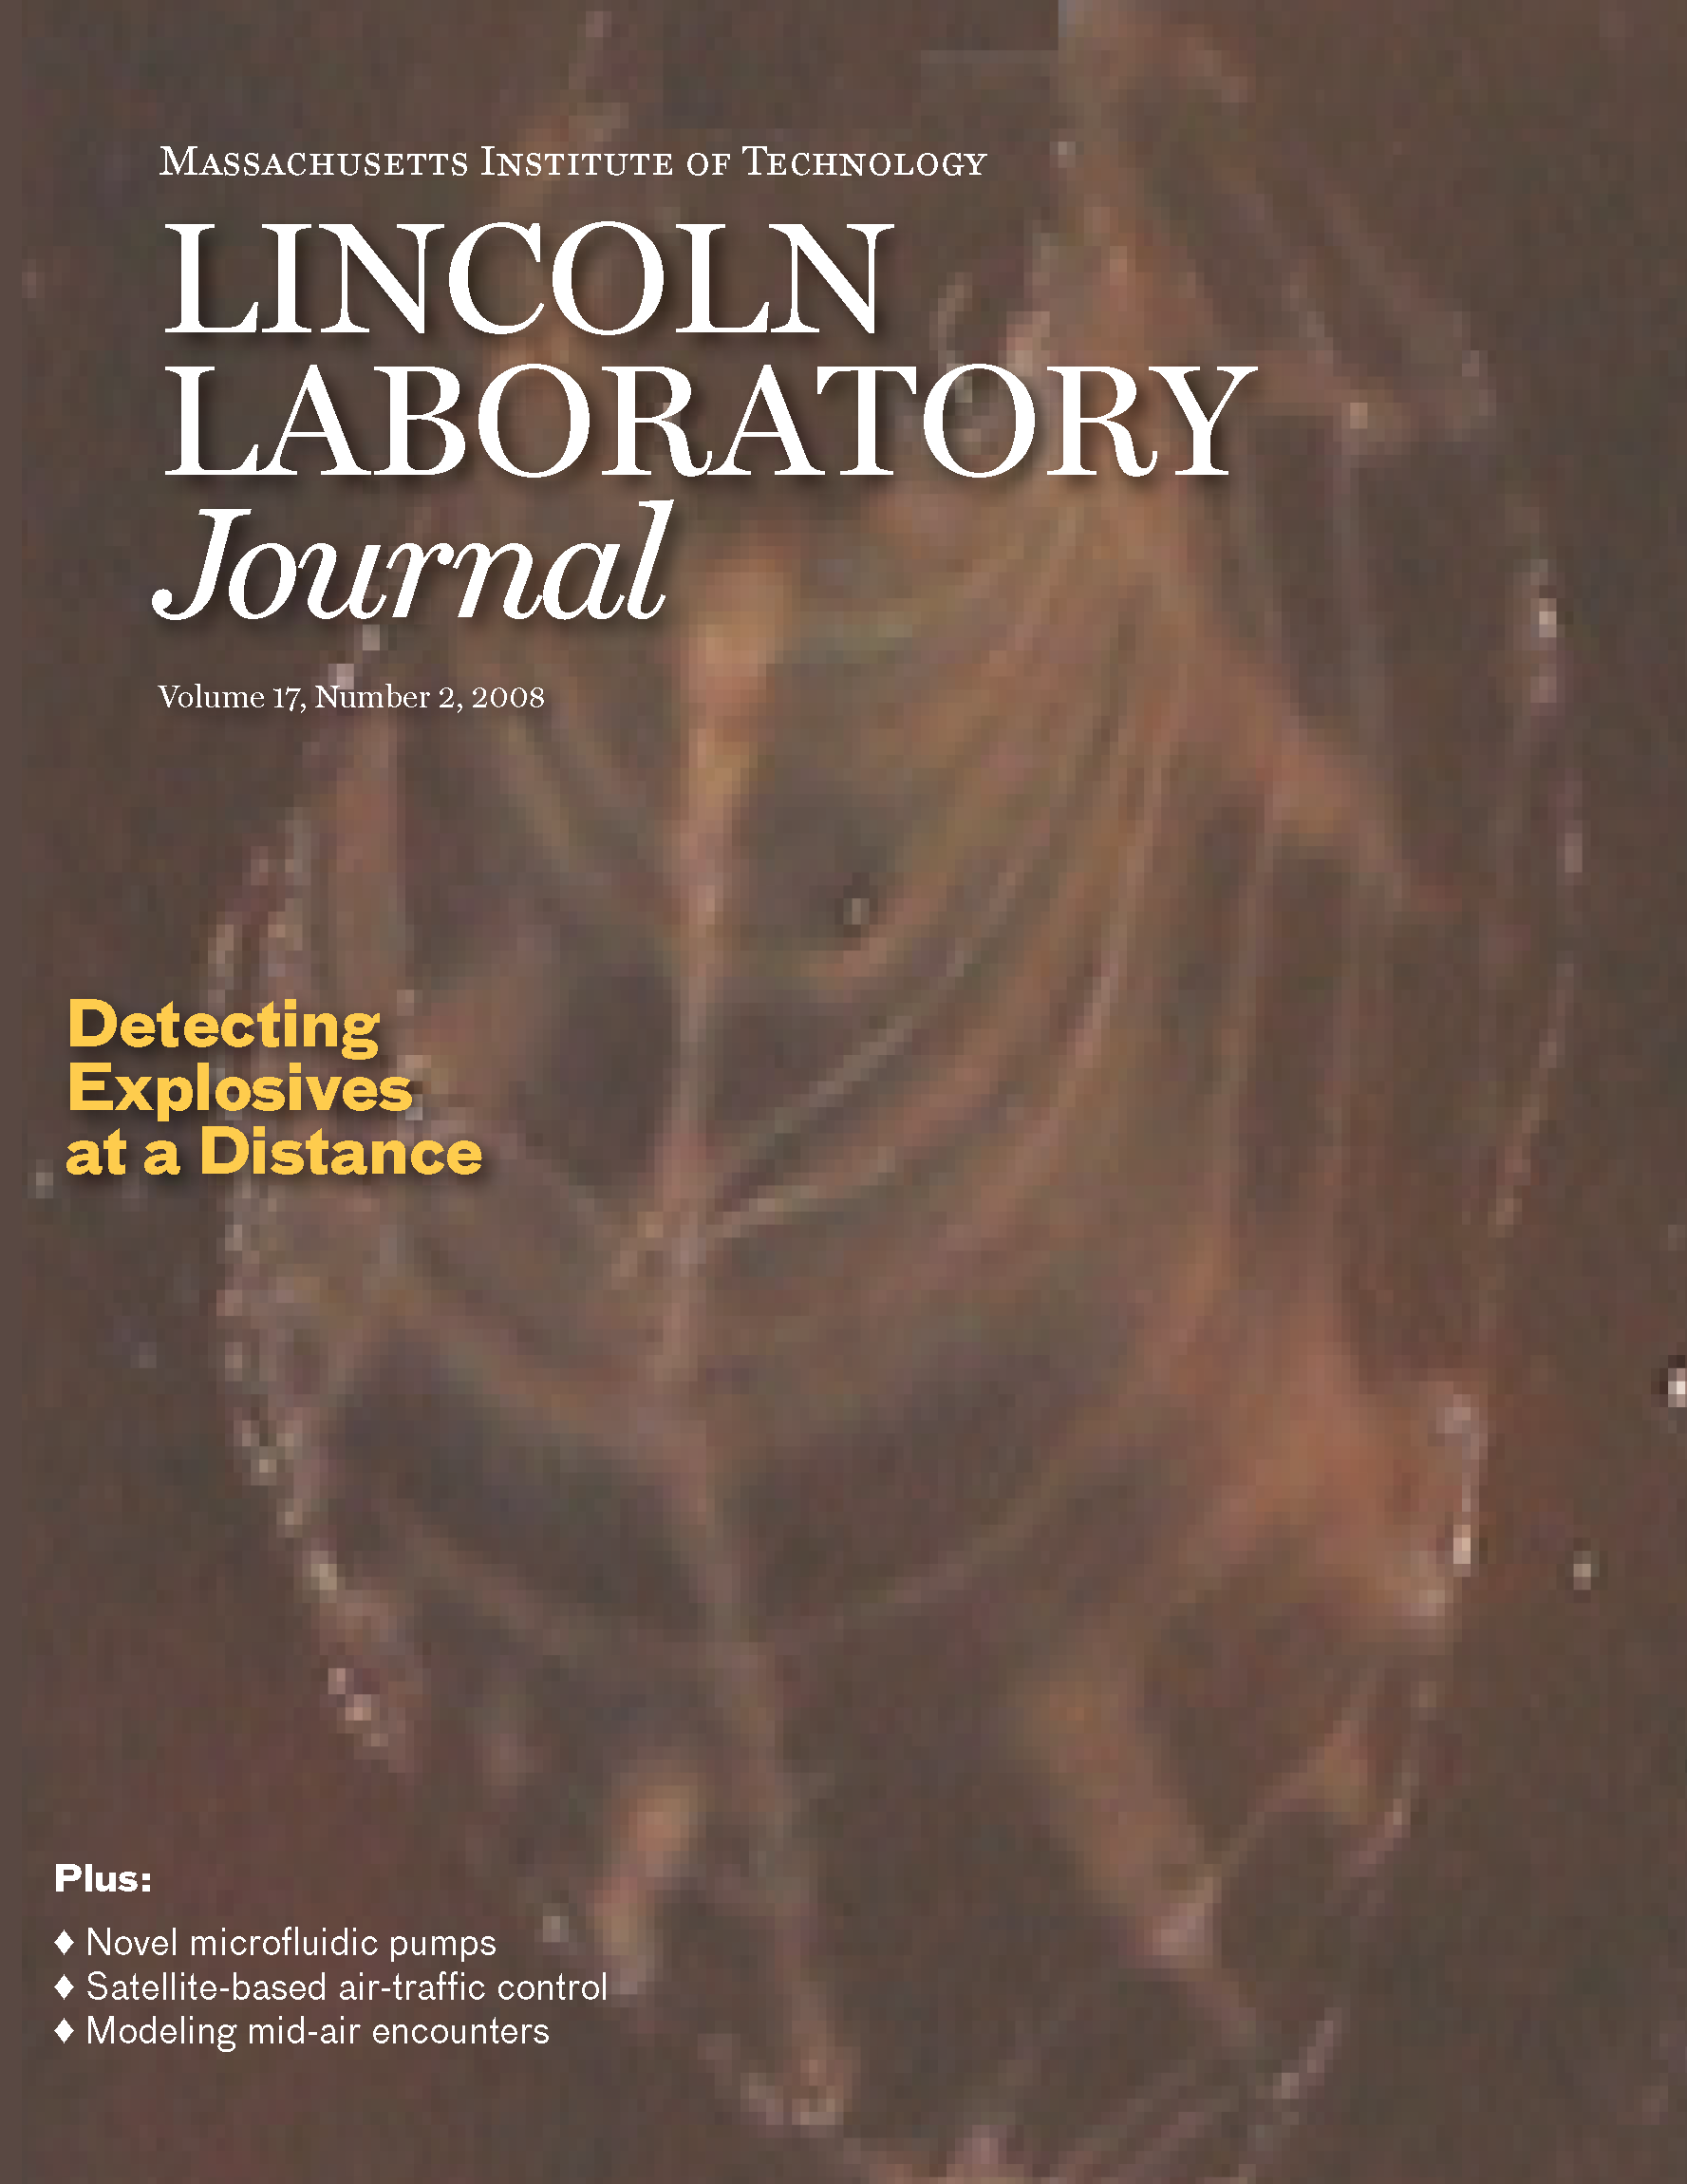 Lincoln Laboratory Journal #17 Issue 2 Cover